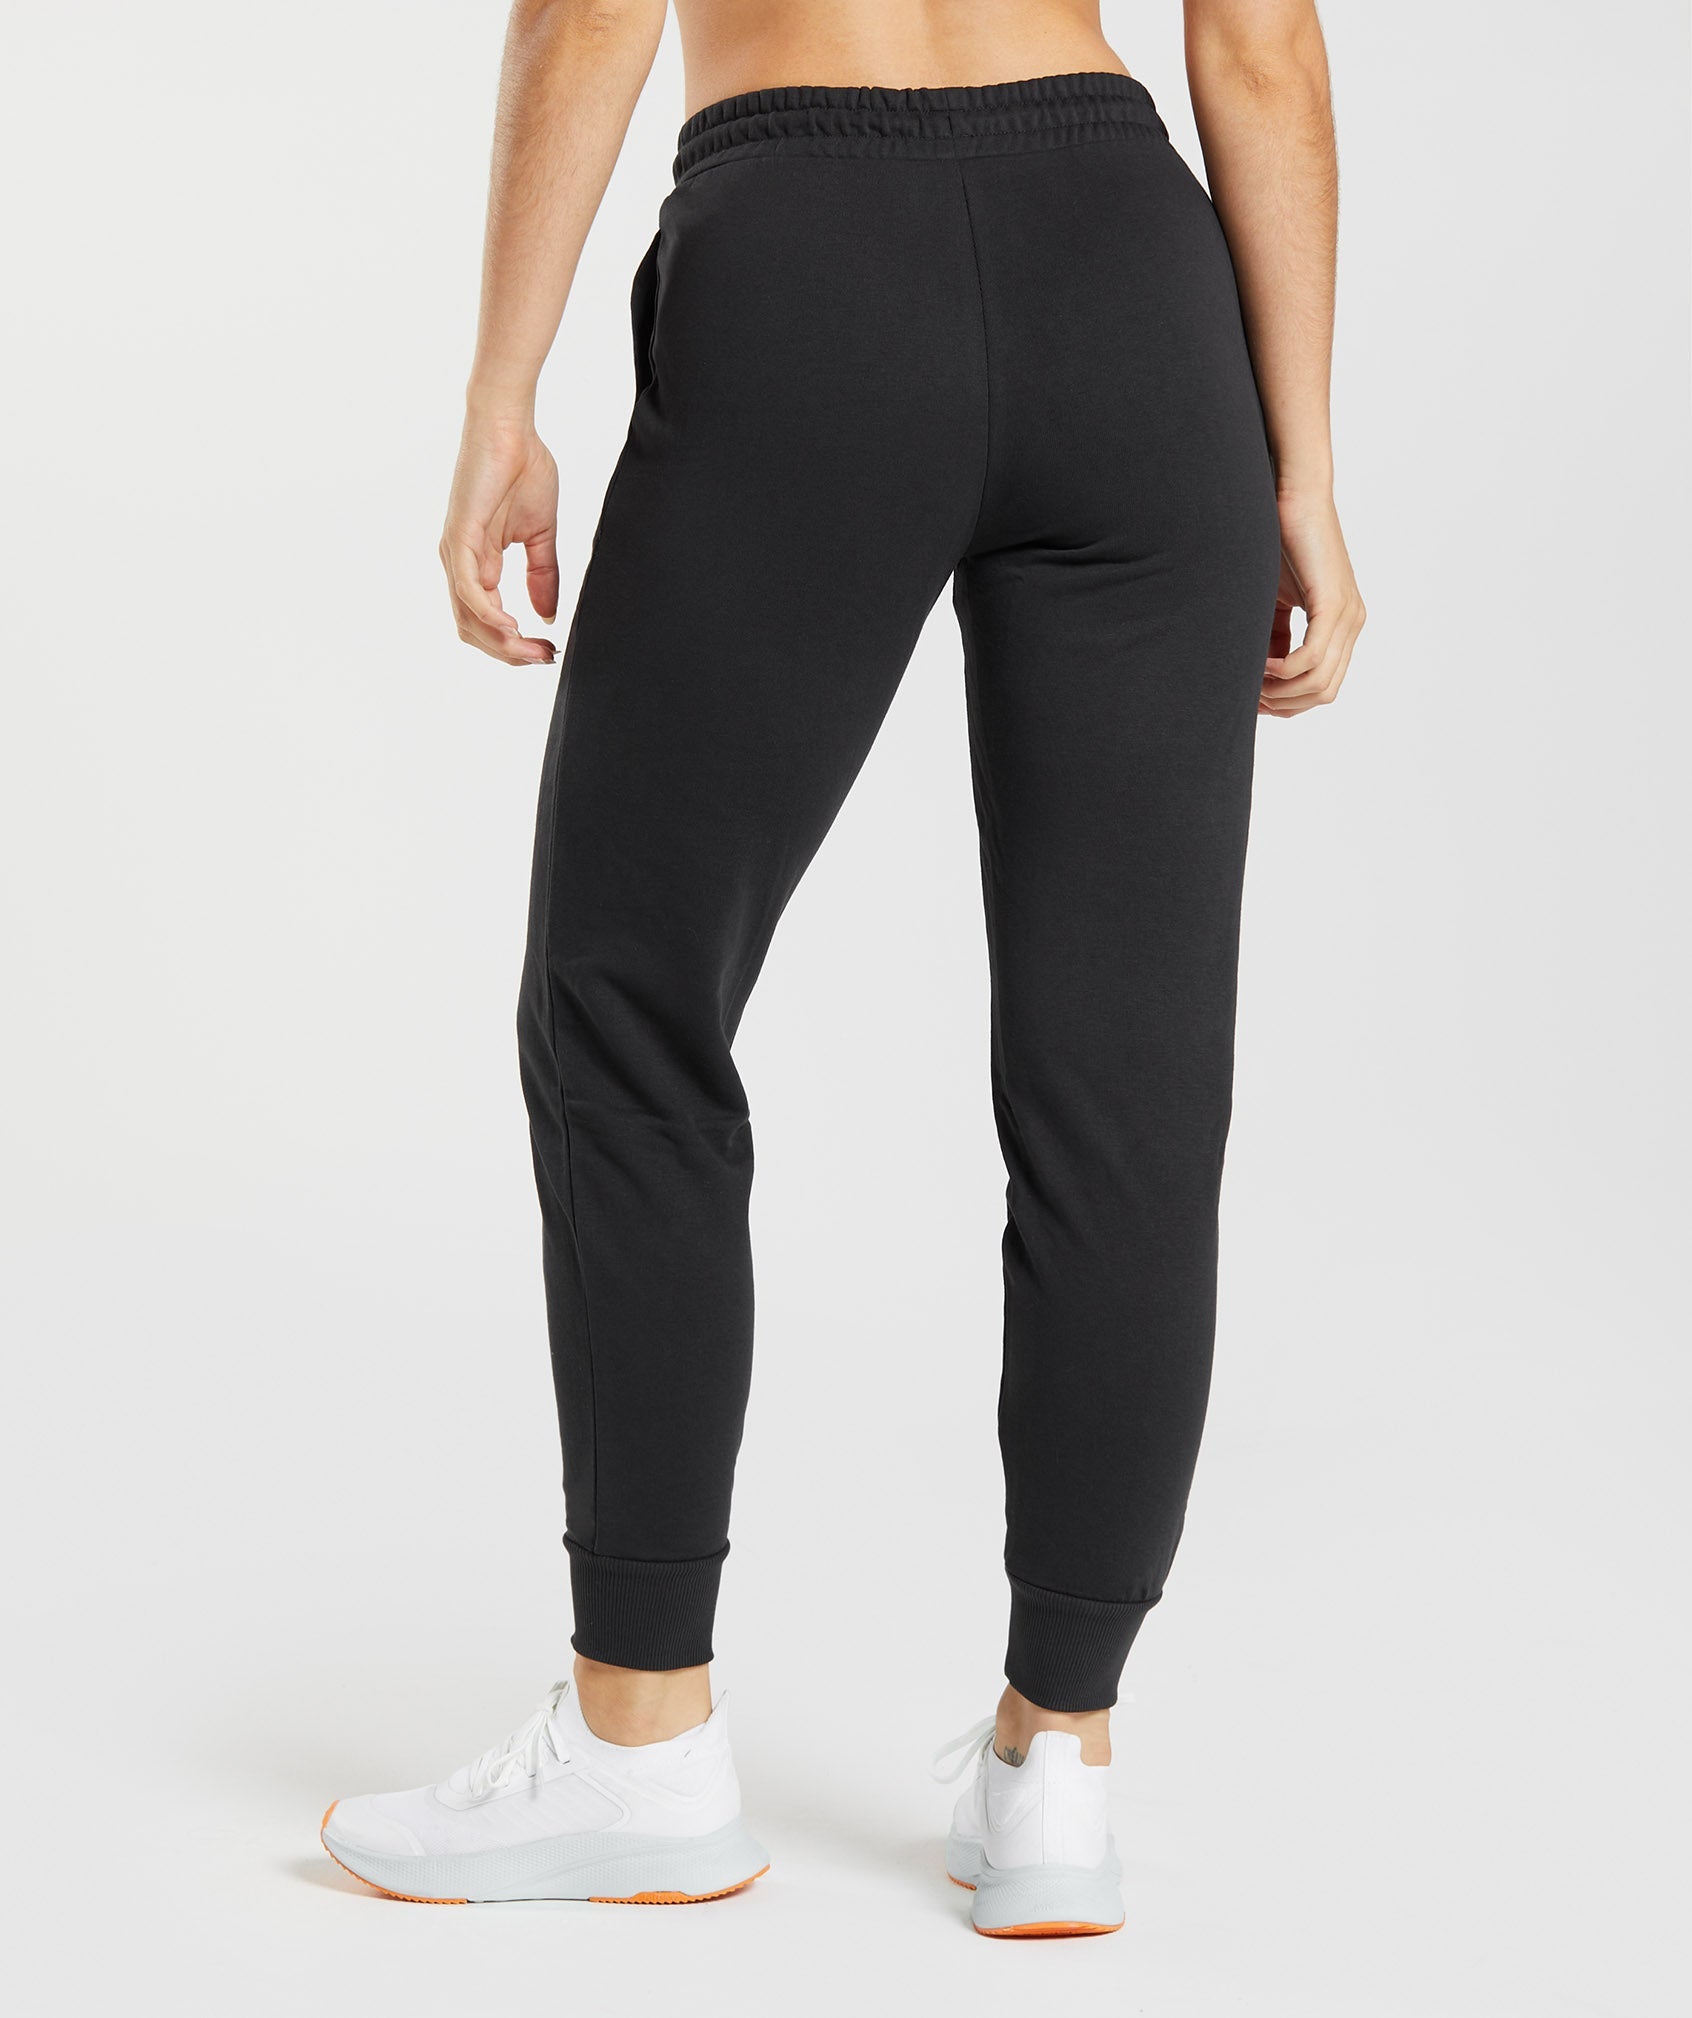 Gymshark Joggers Womens Small Black Pull On Drawstring flawed